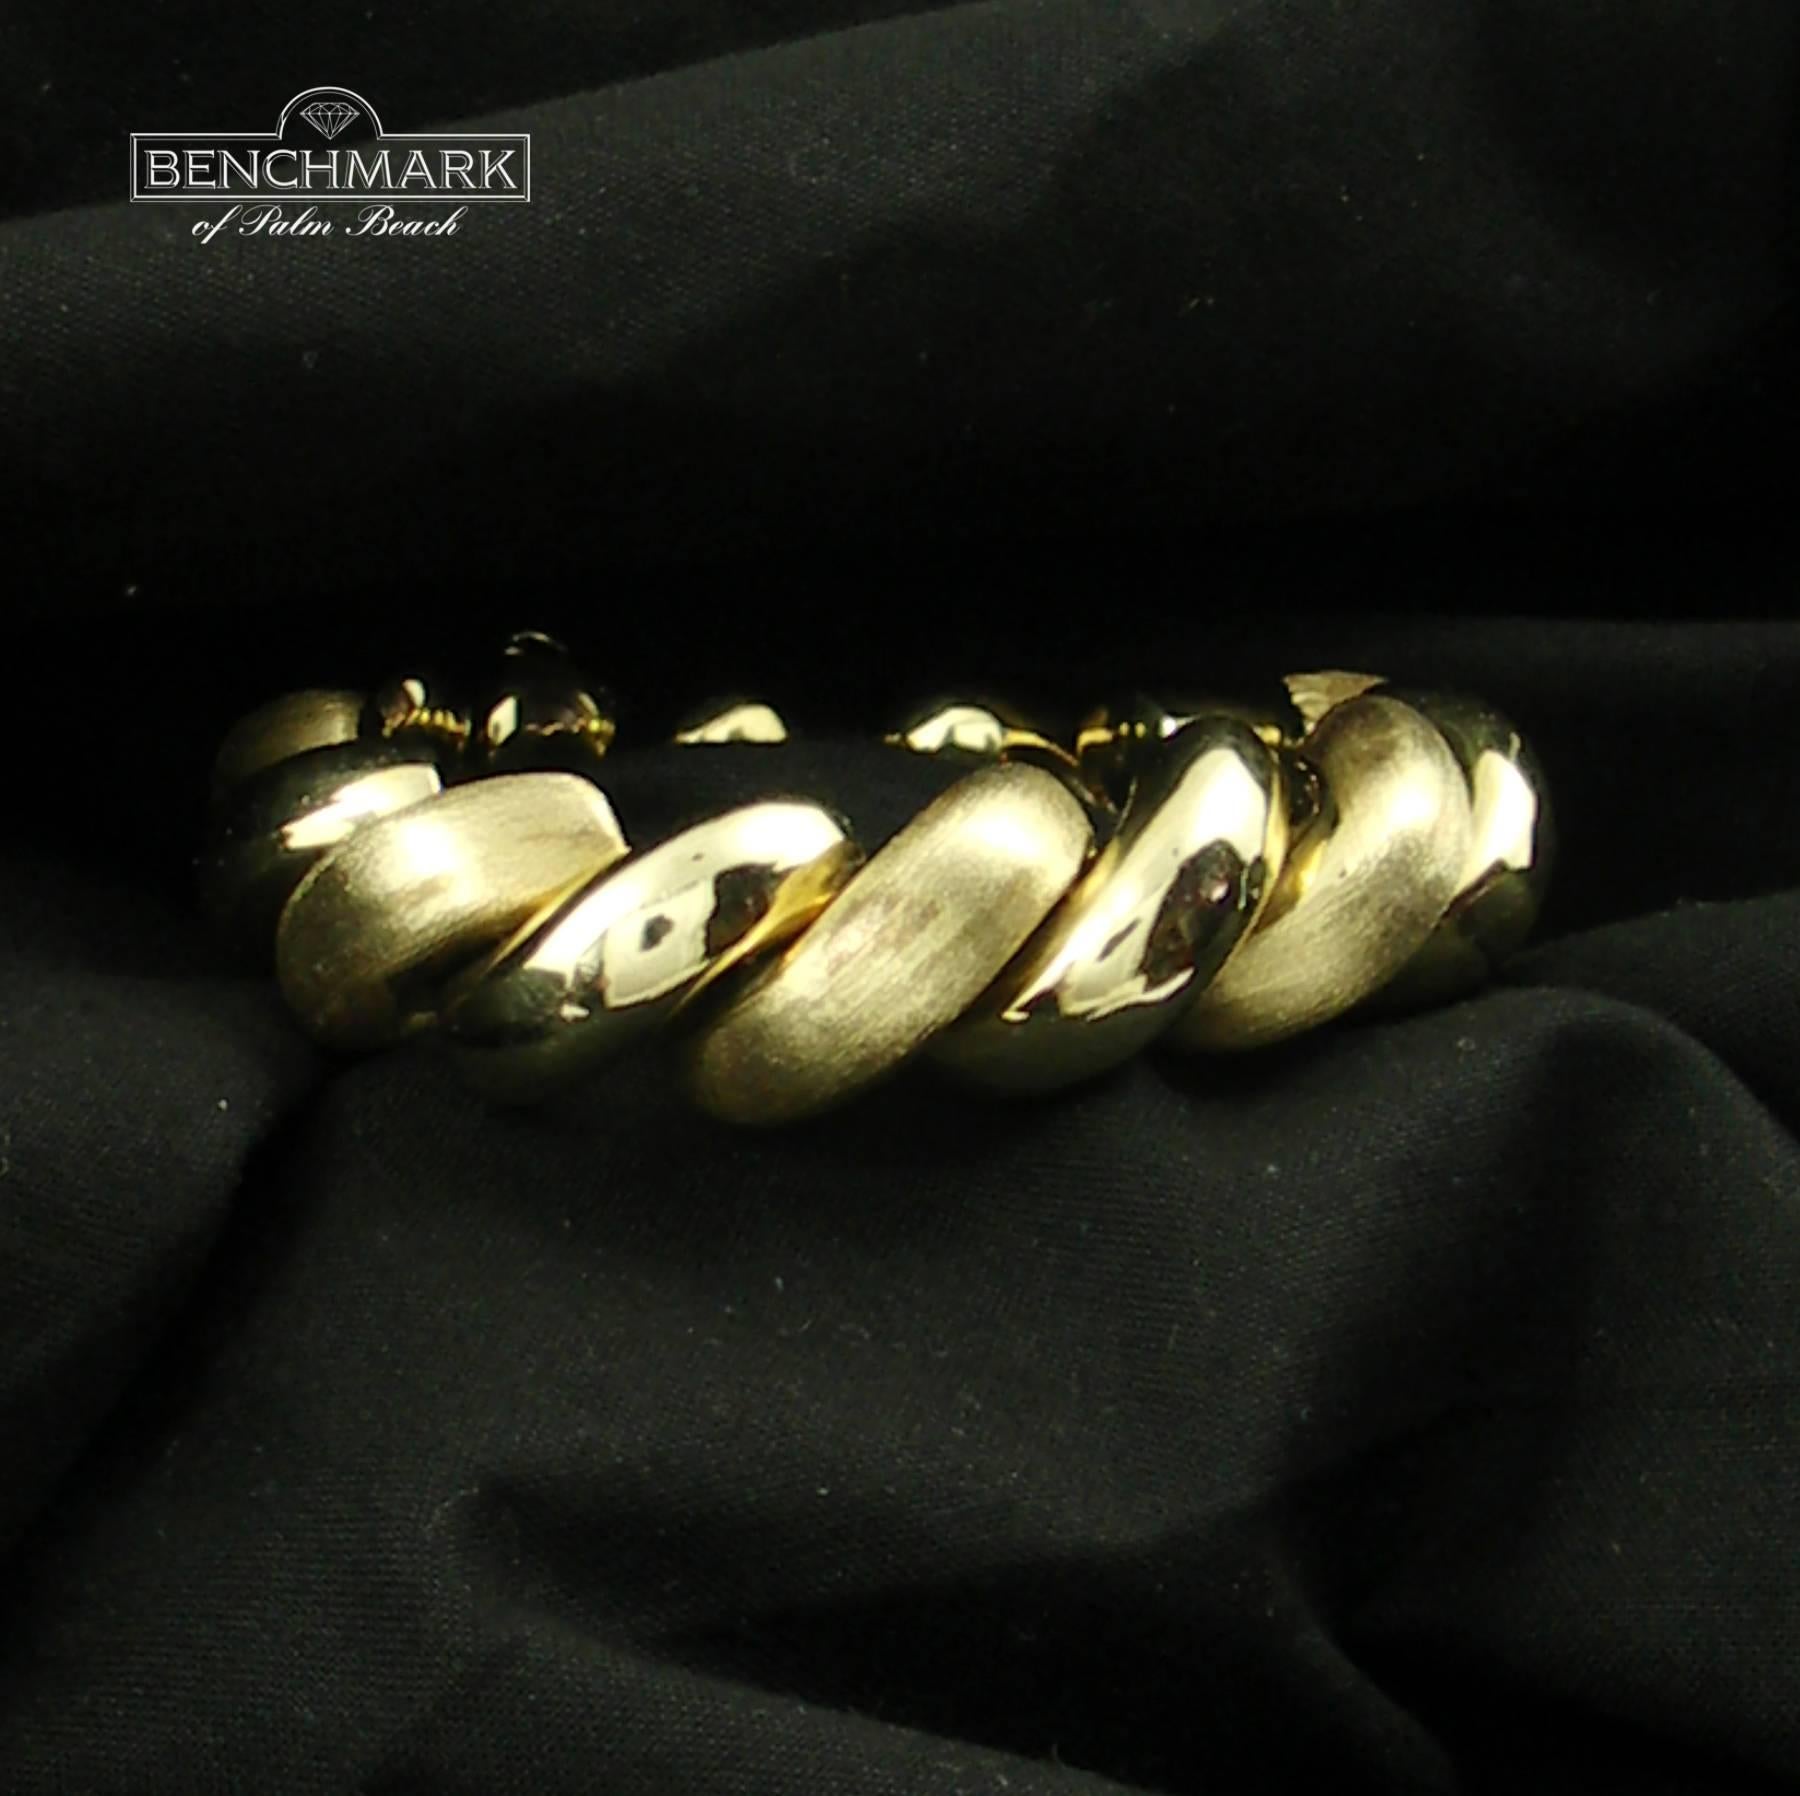 A 14K yellow gold San Marco link bracelet, with alternating links of Florentine finish, and high polish finish, measuring 3/4 of an inch wide, with an inside circumference of 6 1/2 inches.